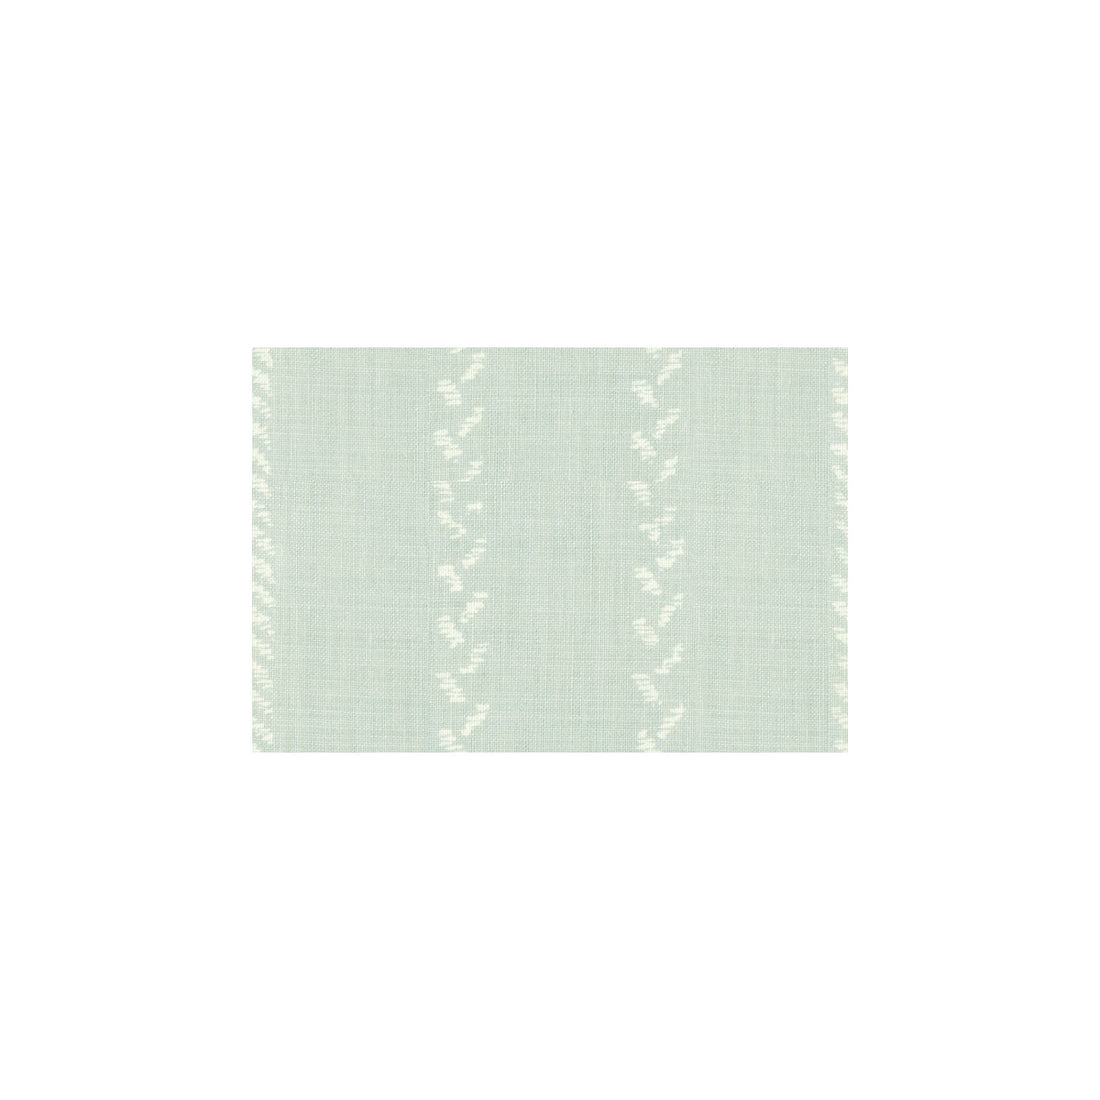 Pelham Stripe fabric in aqua color - pattern BFC-3507.13.0 - by Lee Jofa in the Blithfield collection